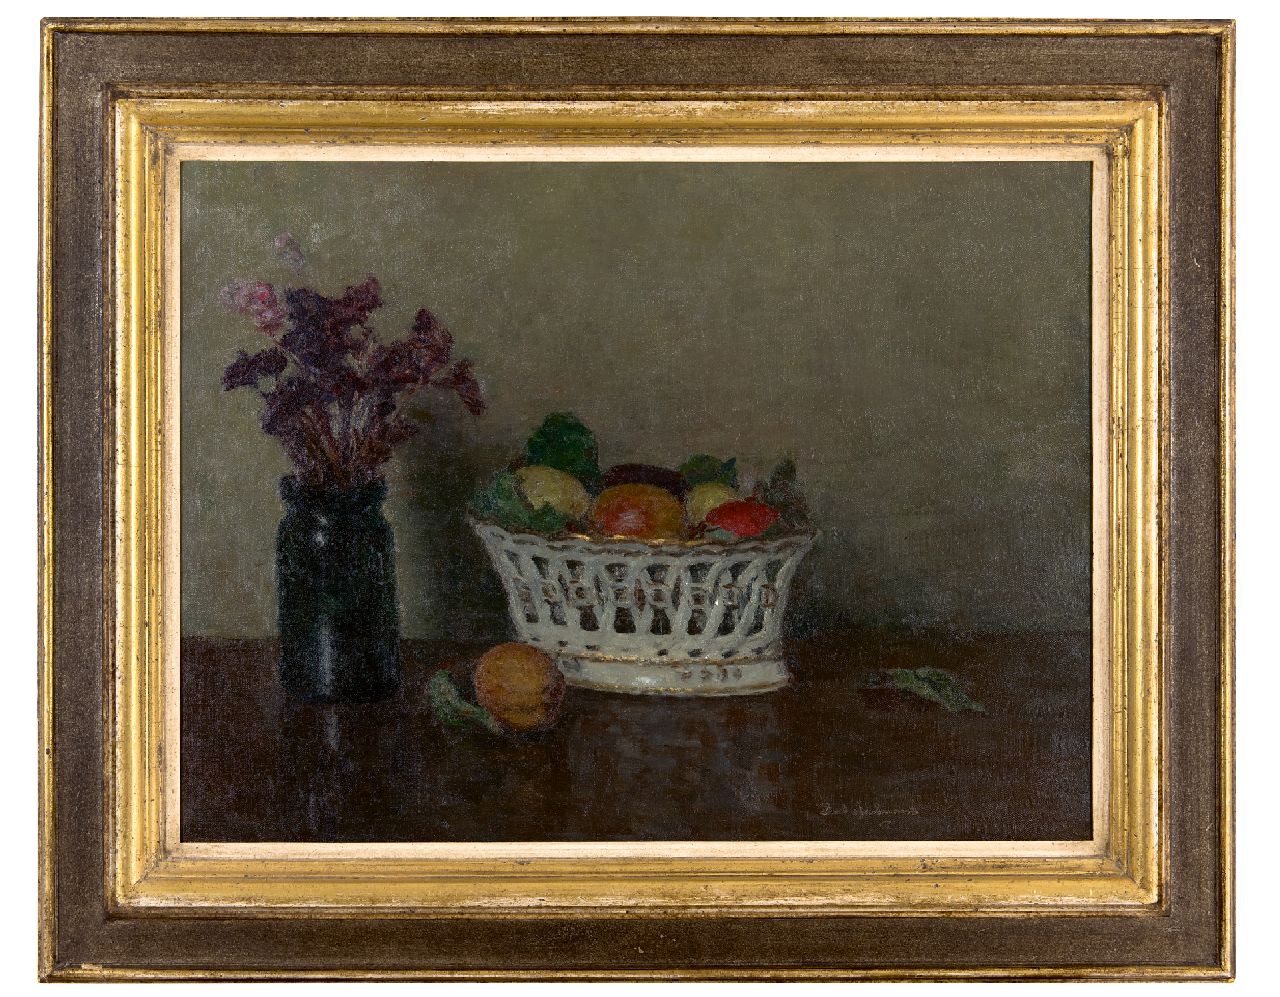 Arntzenius P.  | Paul Arntzenius | Paintings offered for sale | Still life of a fruit basket, oil on canvas 45.0 x 60.0 cm, signed l.r. and dated on stretcher 1955